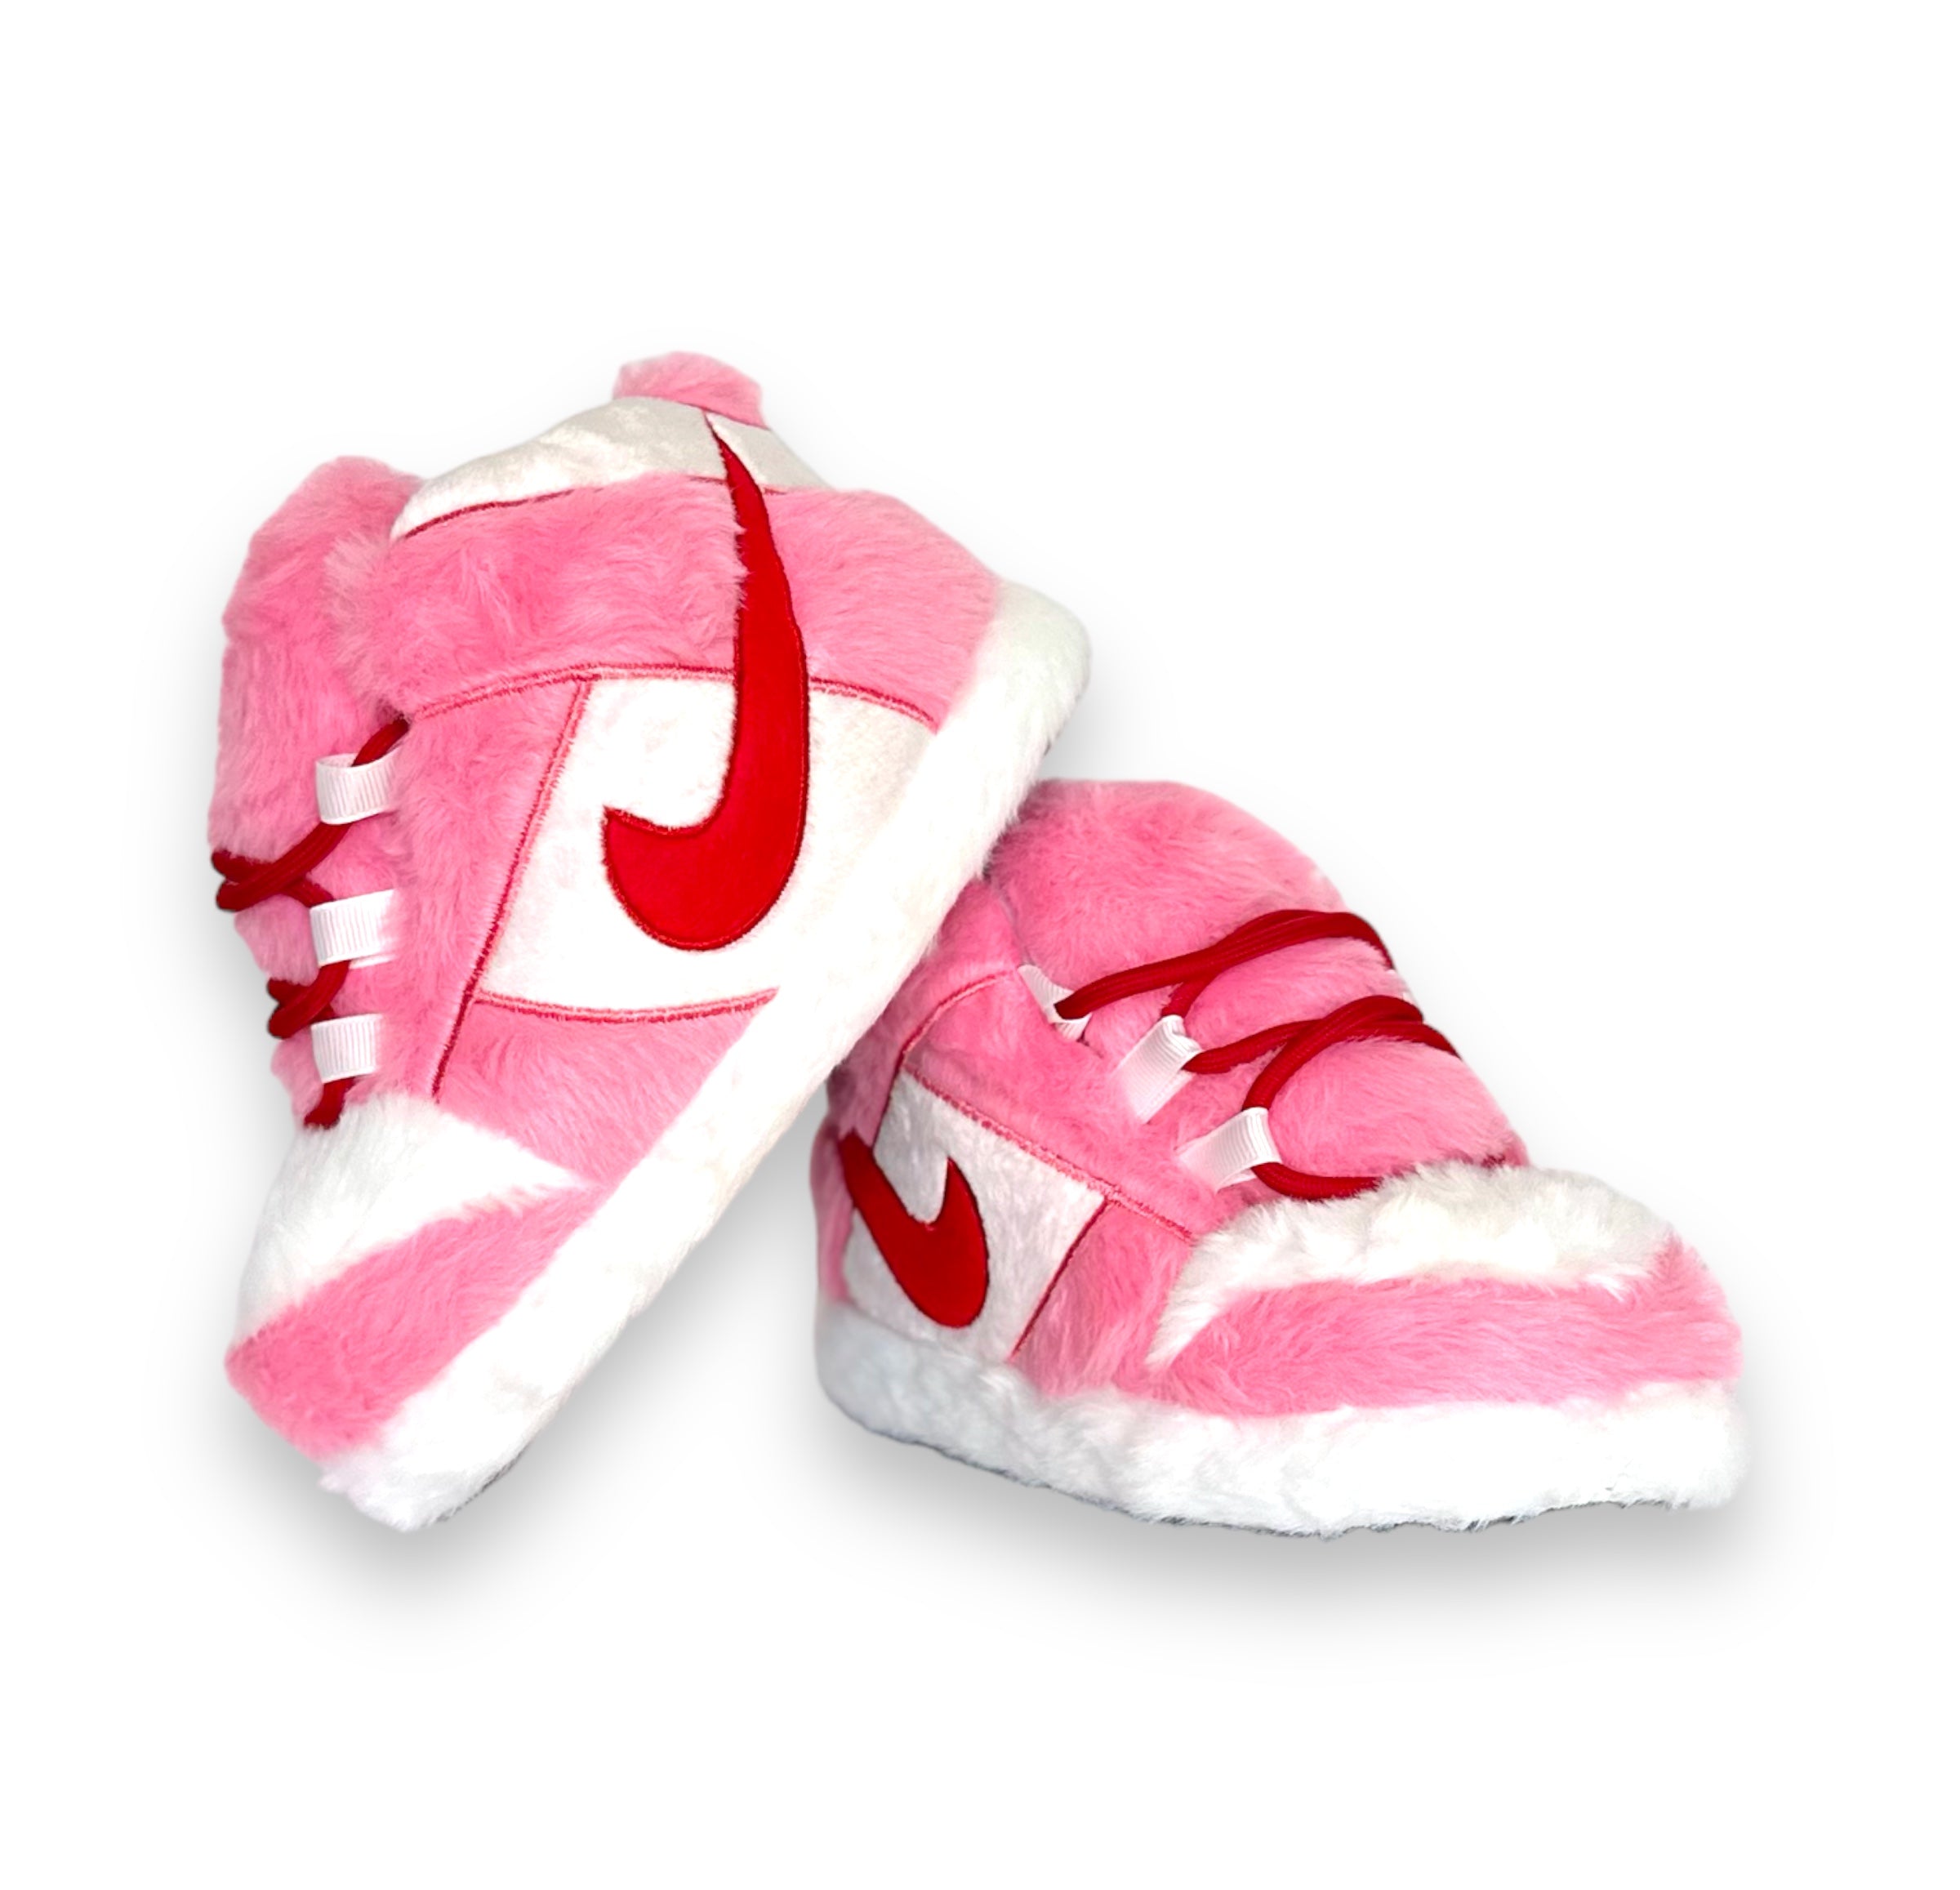 pink sneaker slippers baby size